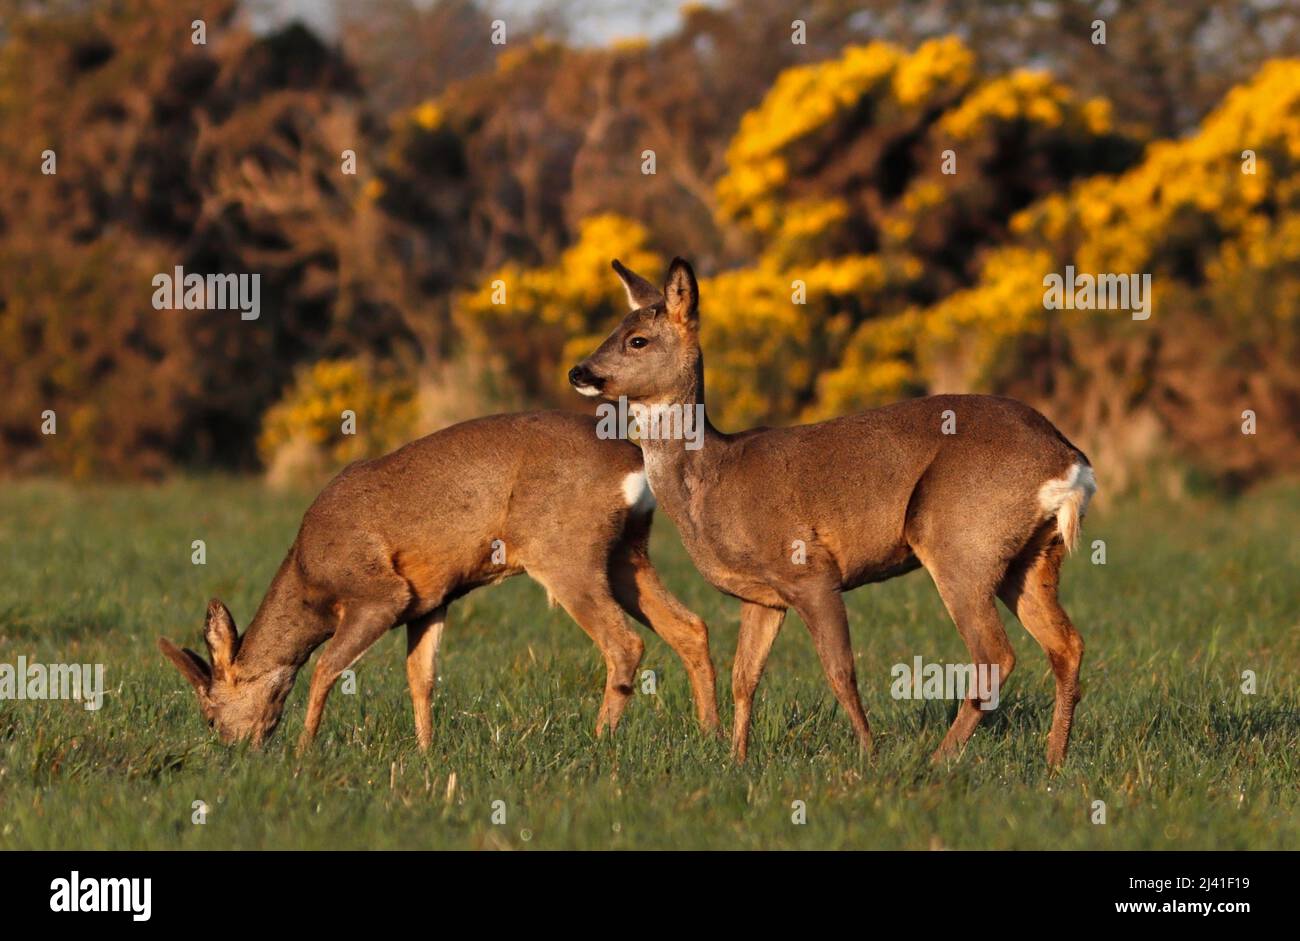 ROE DEER female (doe) and male (buck) foraging together, UK. Stock Photo